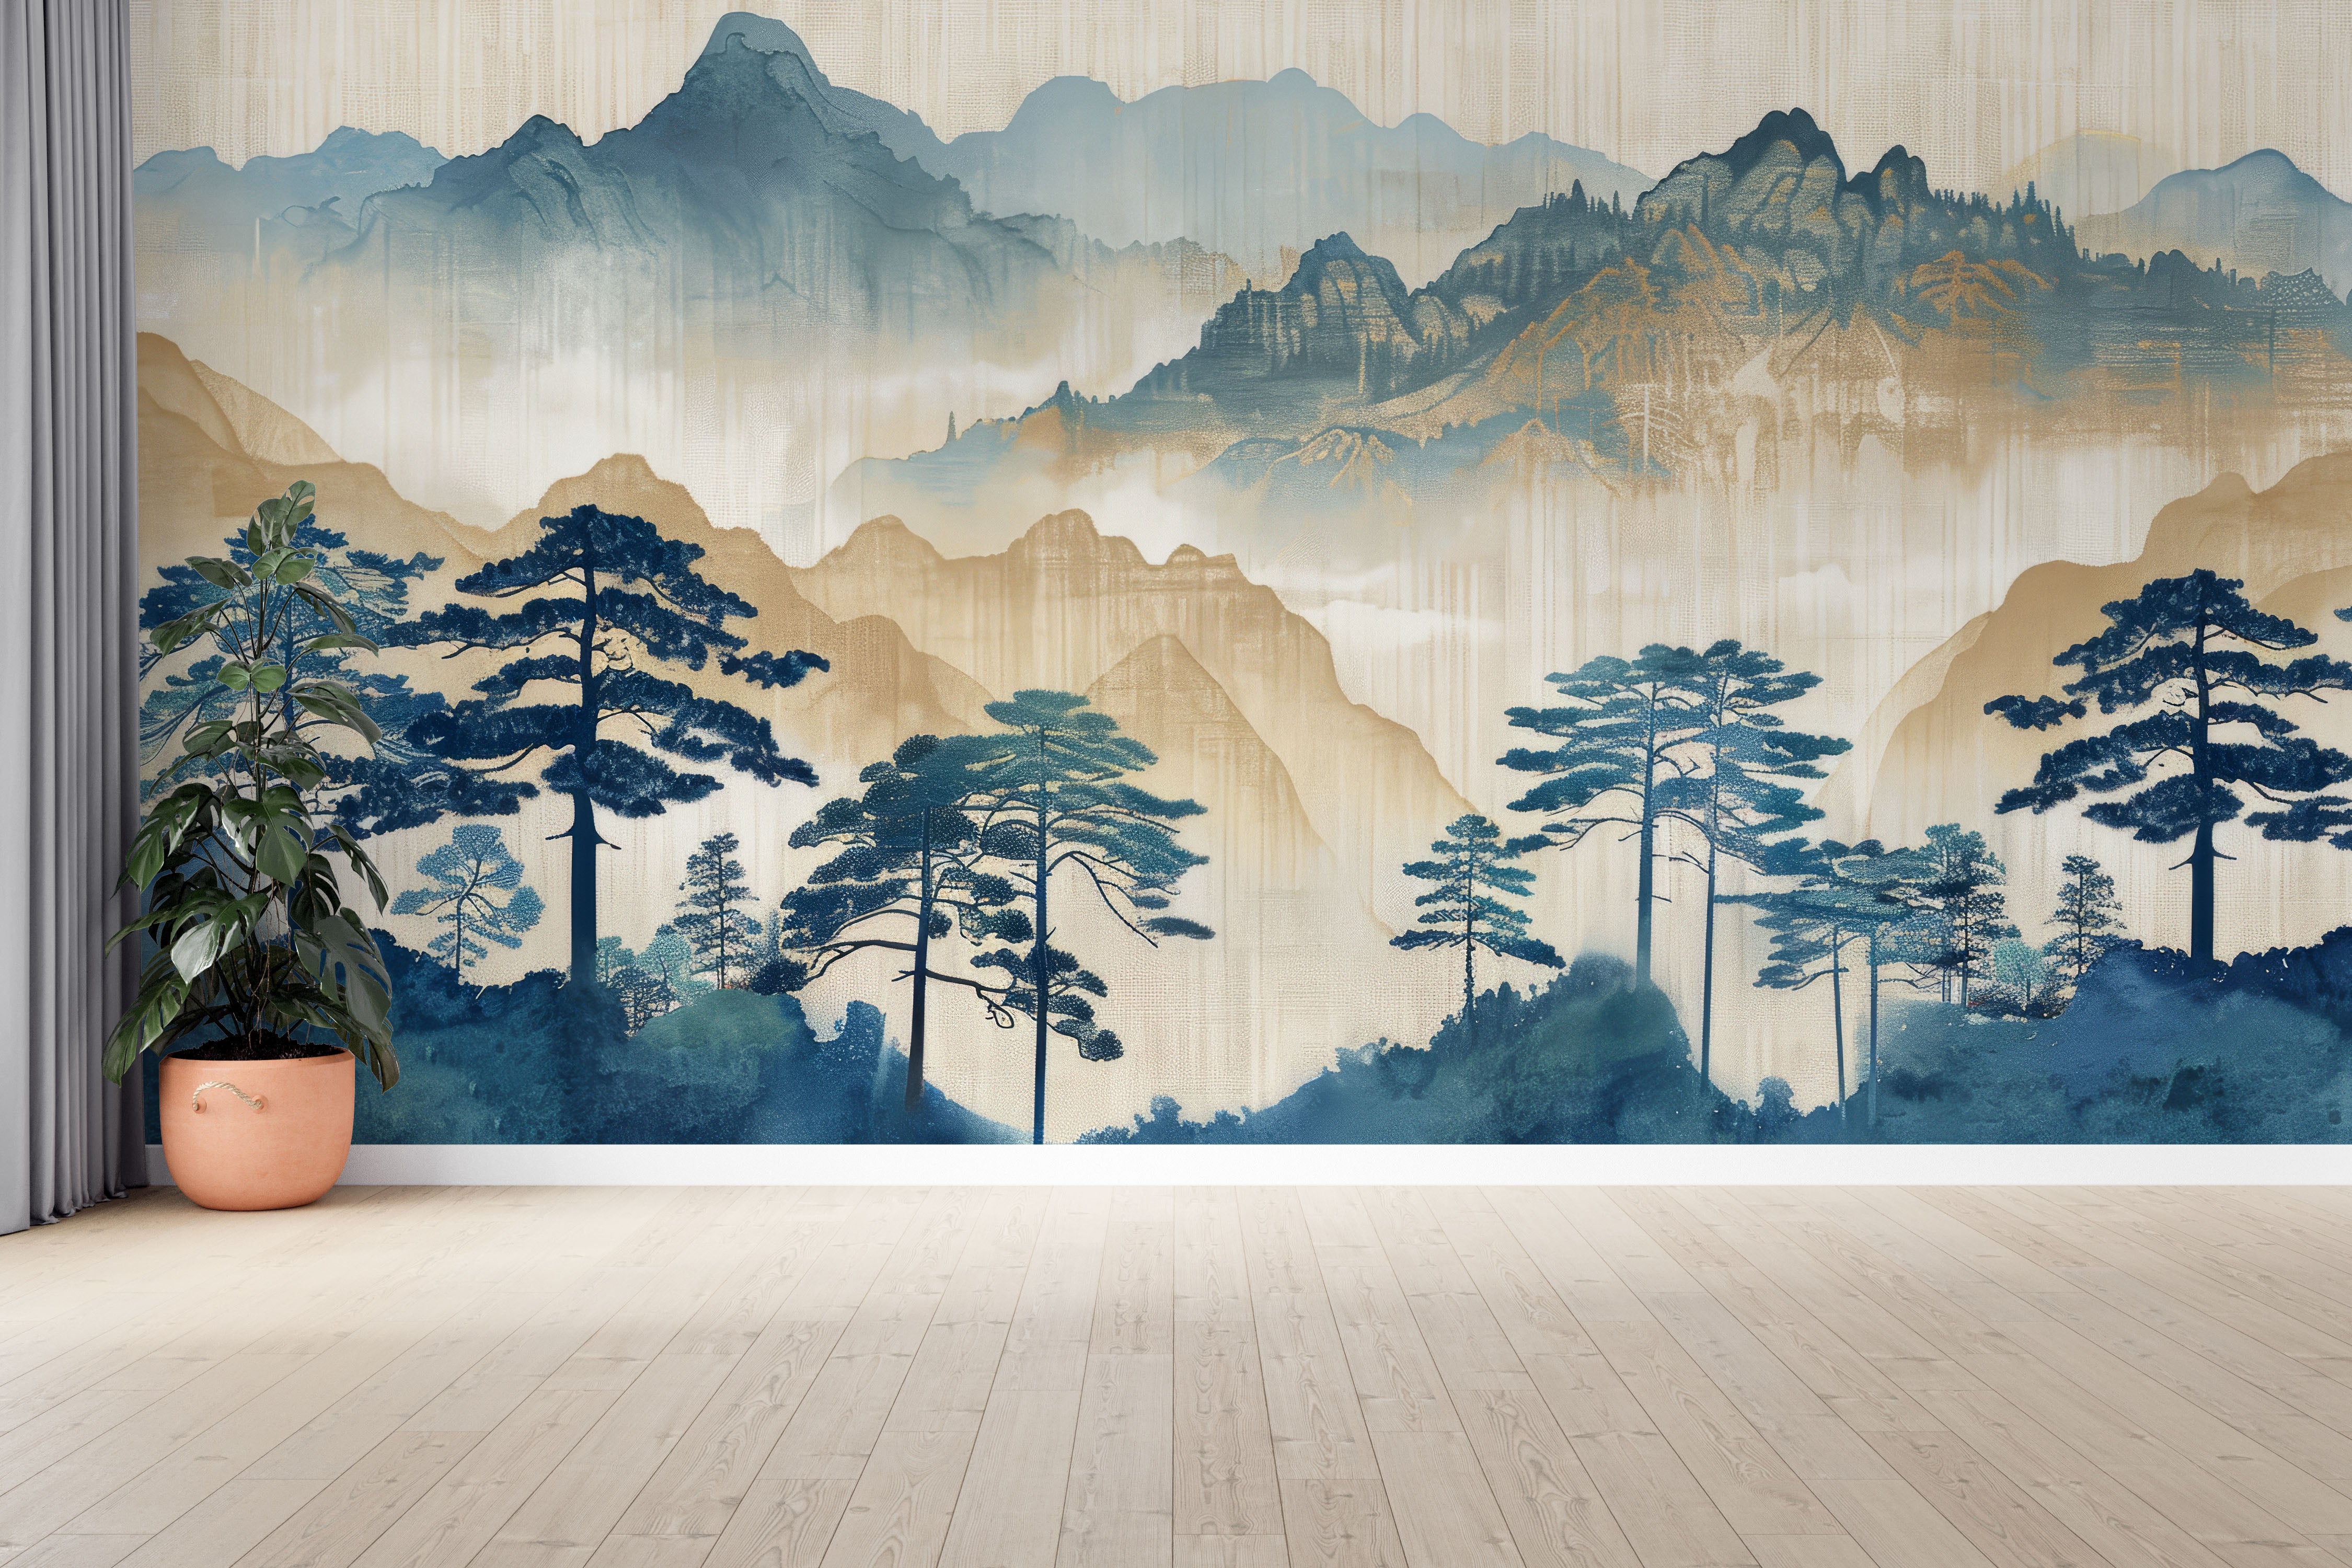 Asian escape: Silhouettes of Mountains and Forest